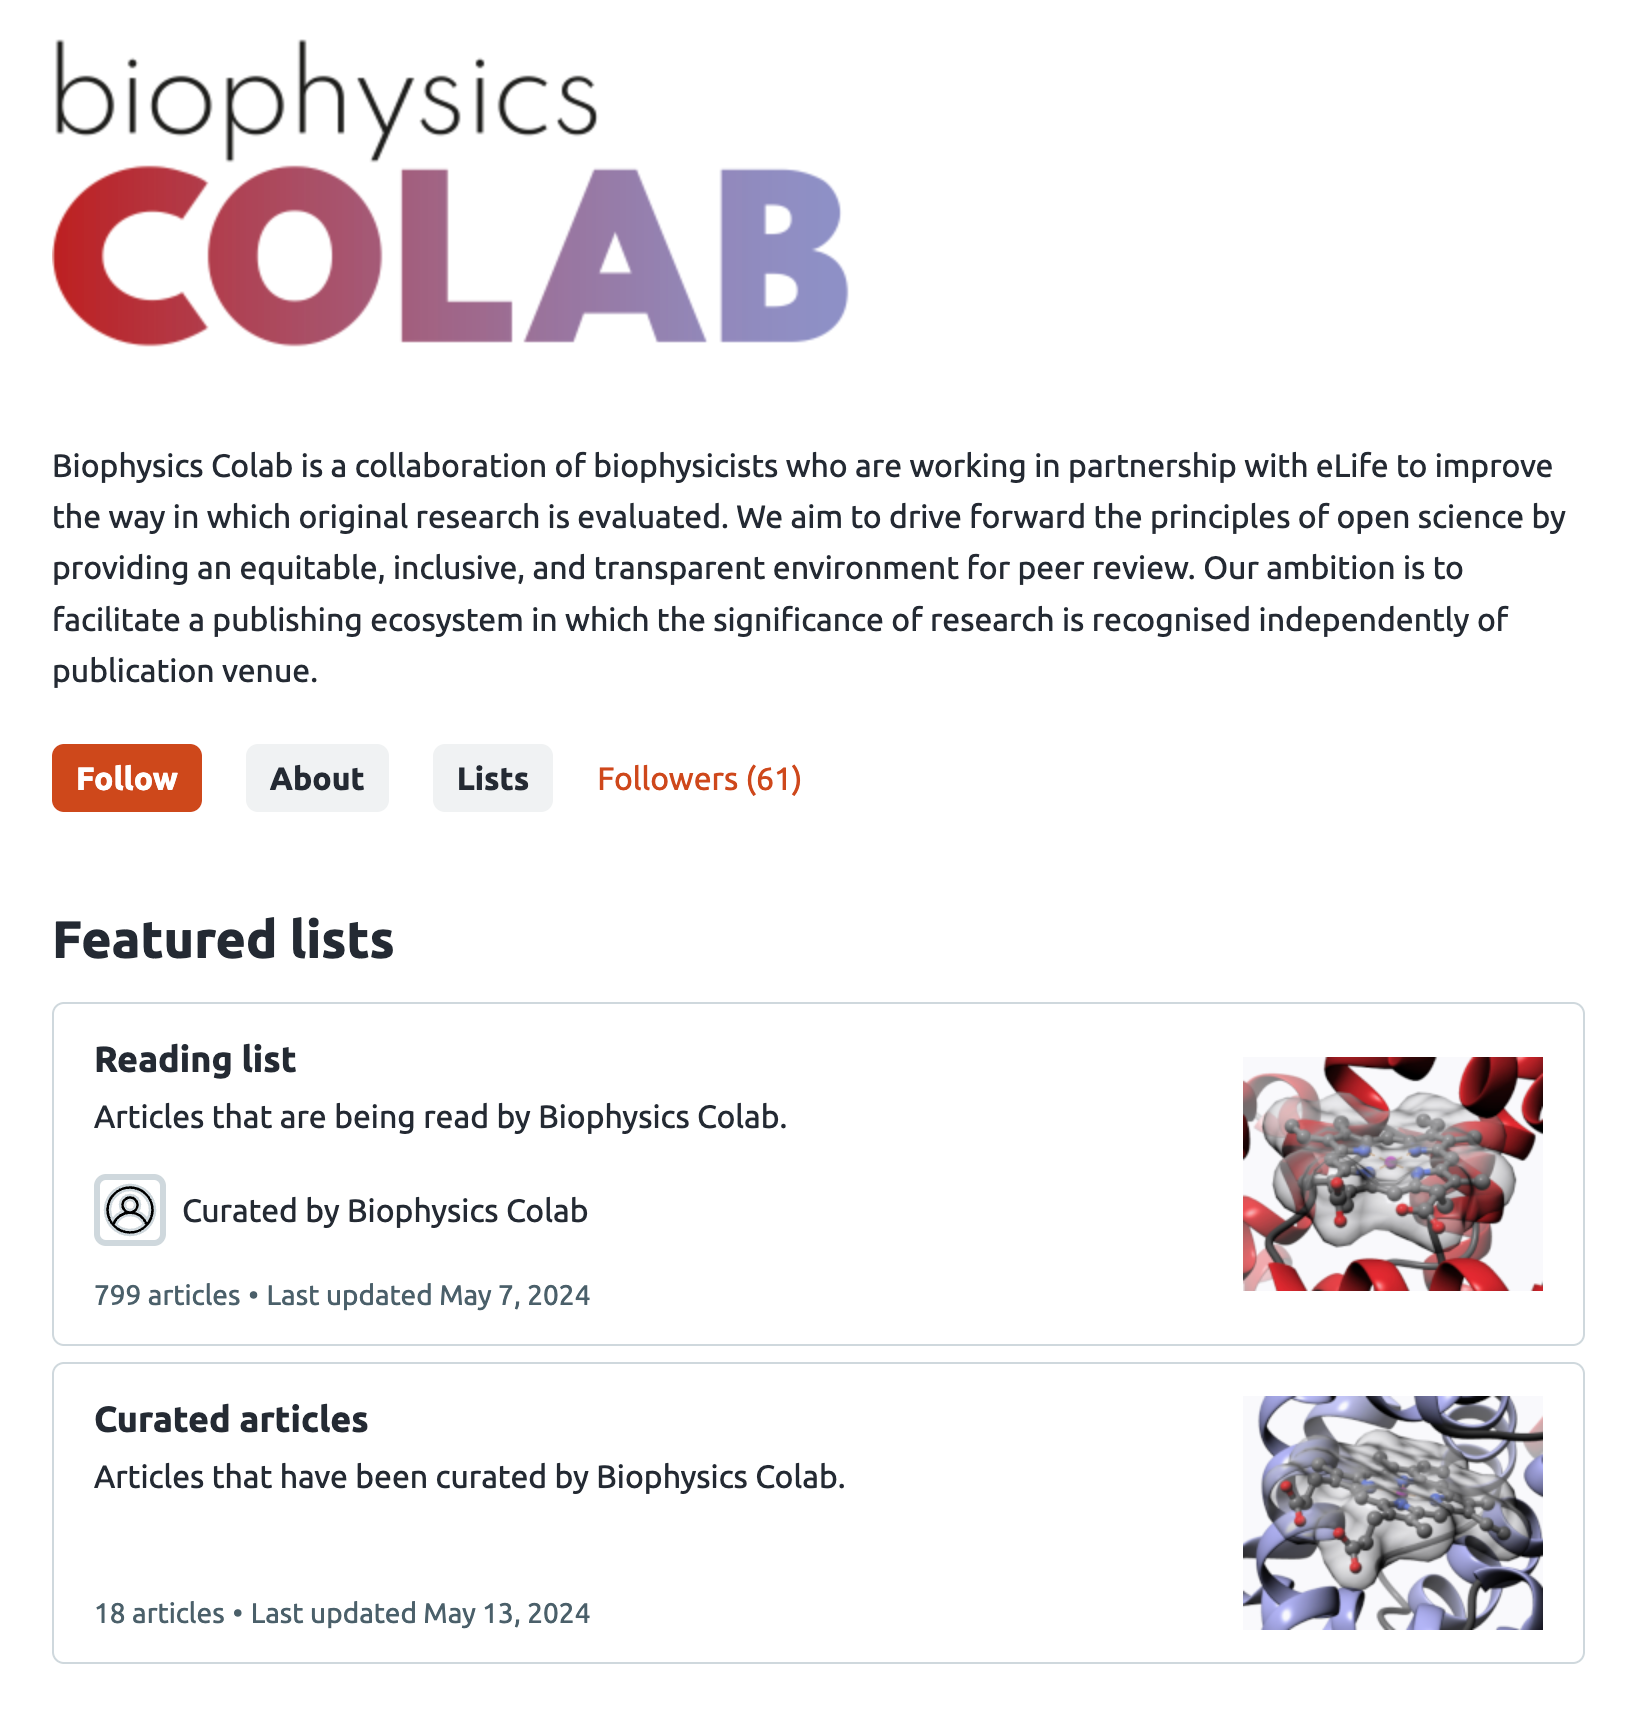 An example of two featured lists for the Biophysics Colab group page